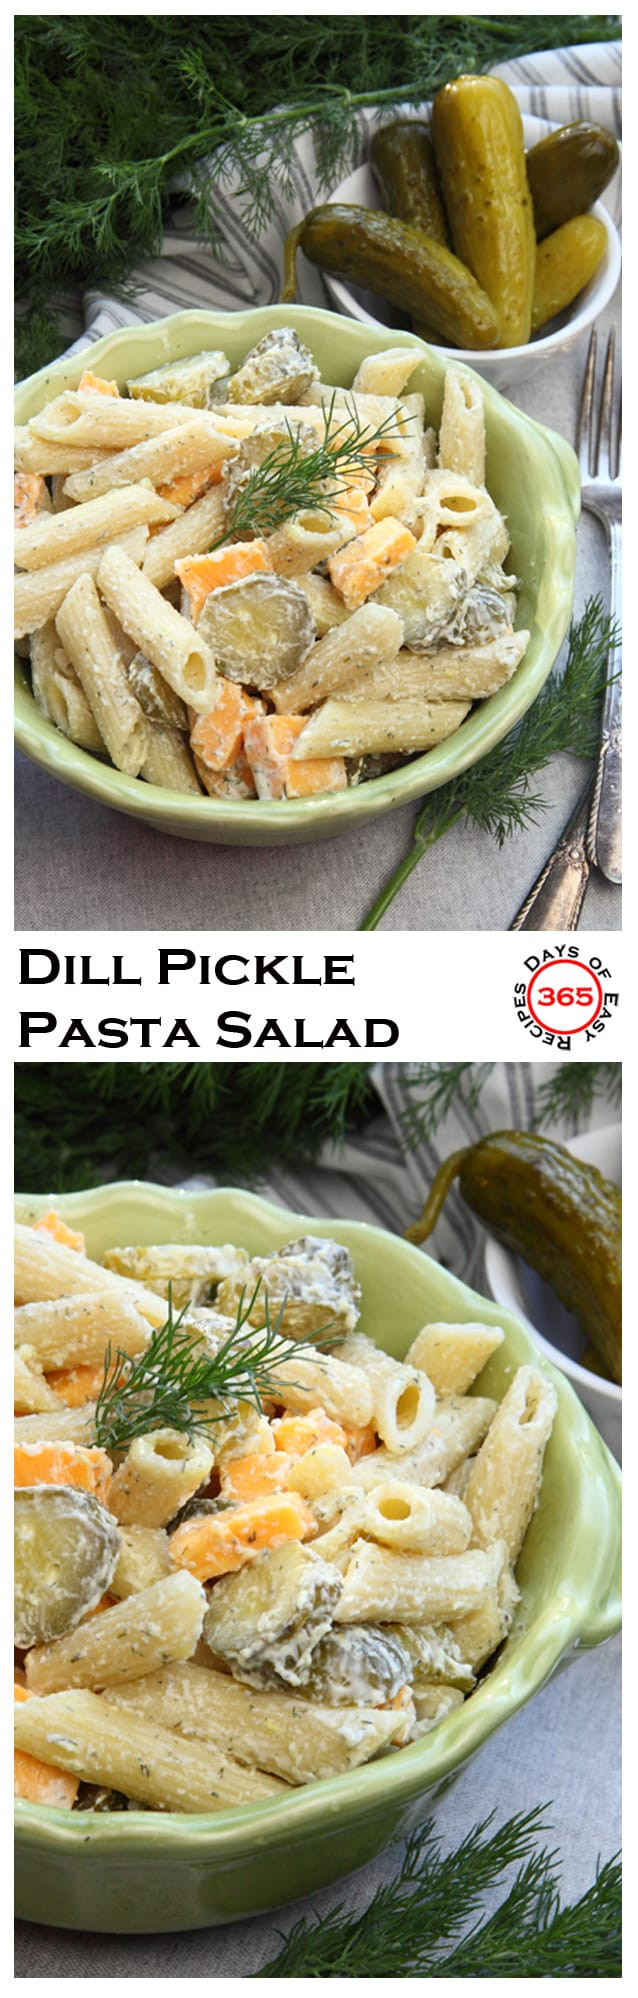 Dill Pasta Salad
 Dill Pickle Pasta Salad 365 Days of Easy Recipes